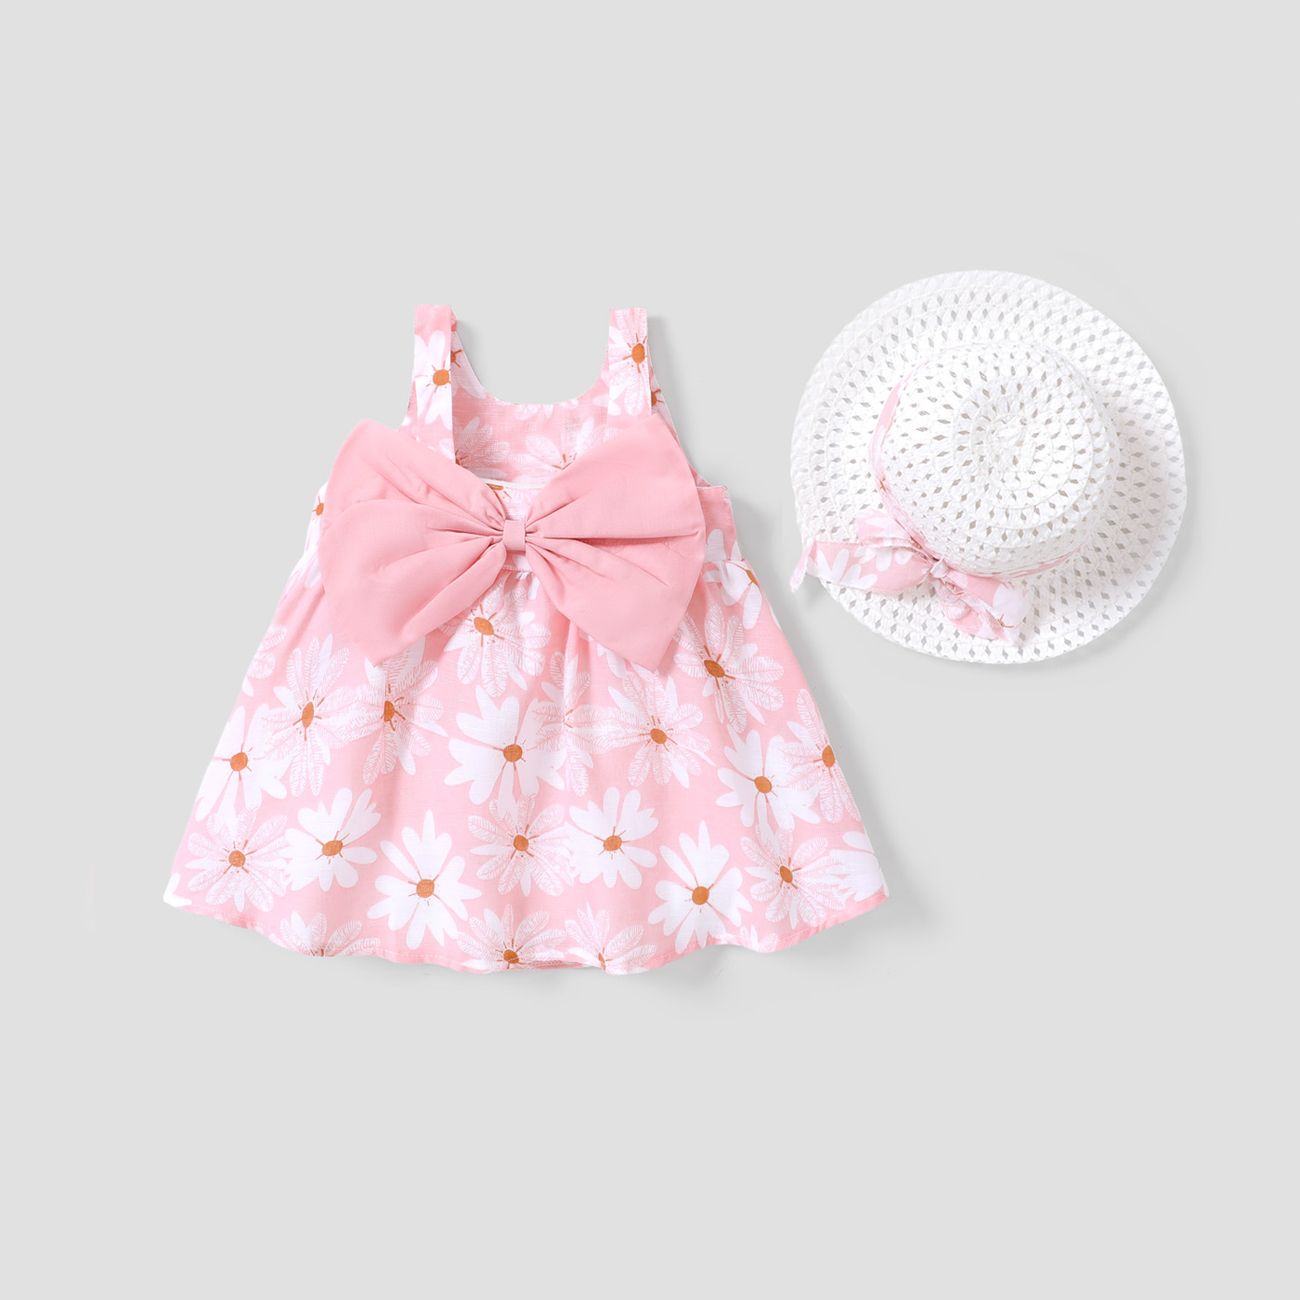 PatPat Baby Girl Love Heart Print Sling Bowknot Splicing Dress,Infant Long  Sleeve Fall Outfit Suspender Midi Dress Casual A-Line Party Birthday